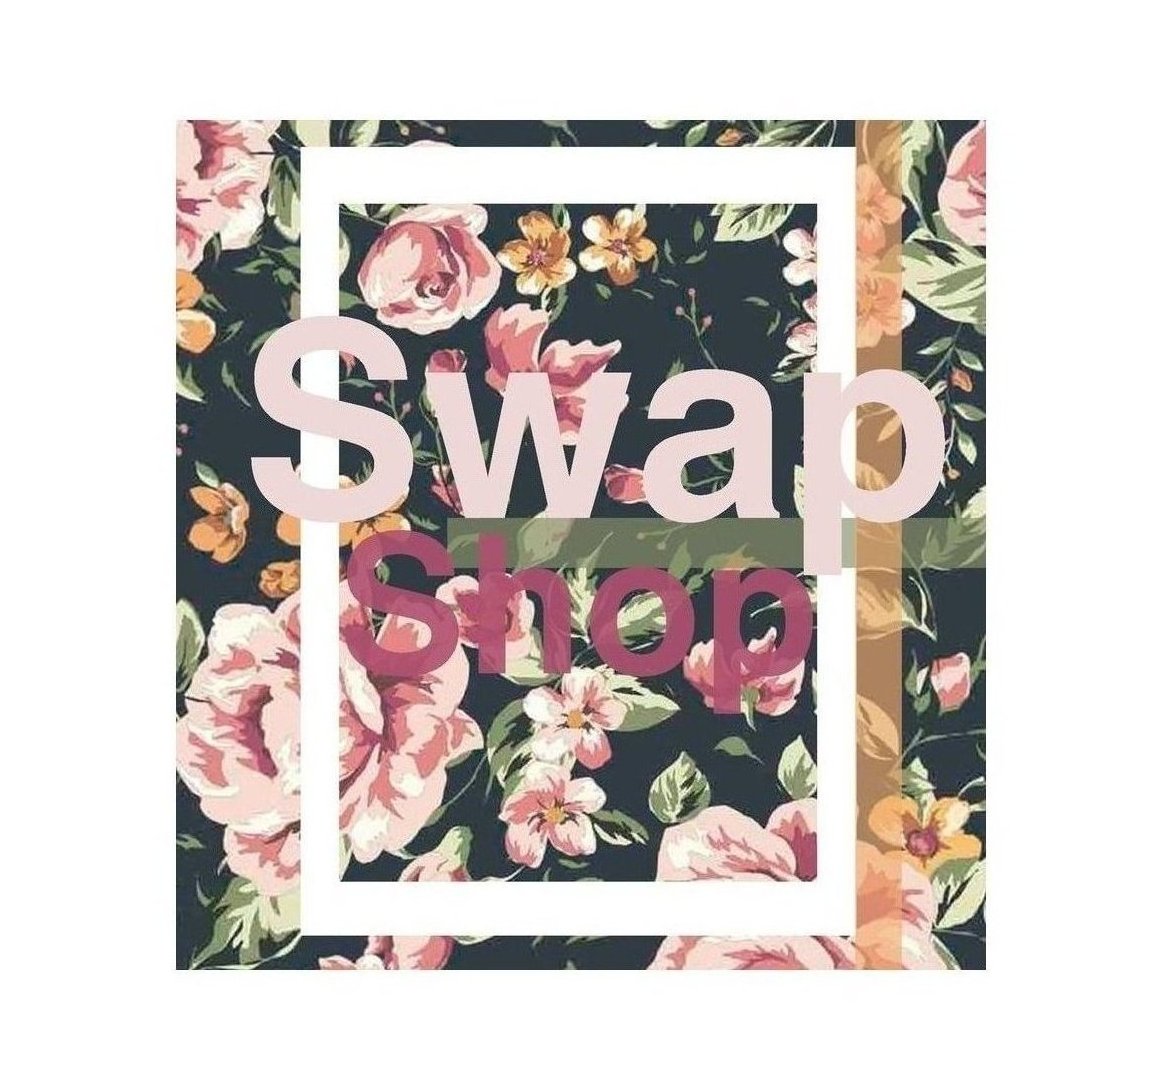 Swap Shop – 2nd February at 8pm